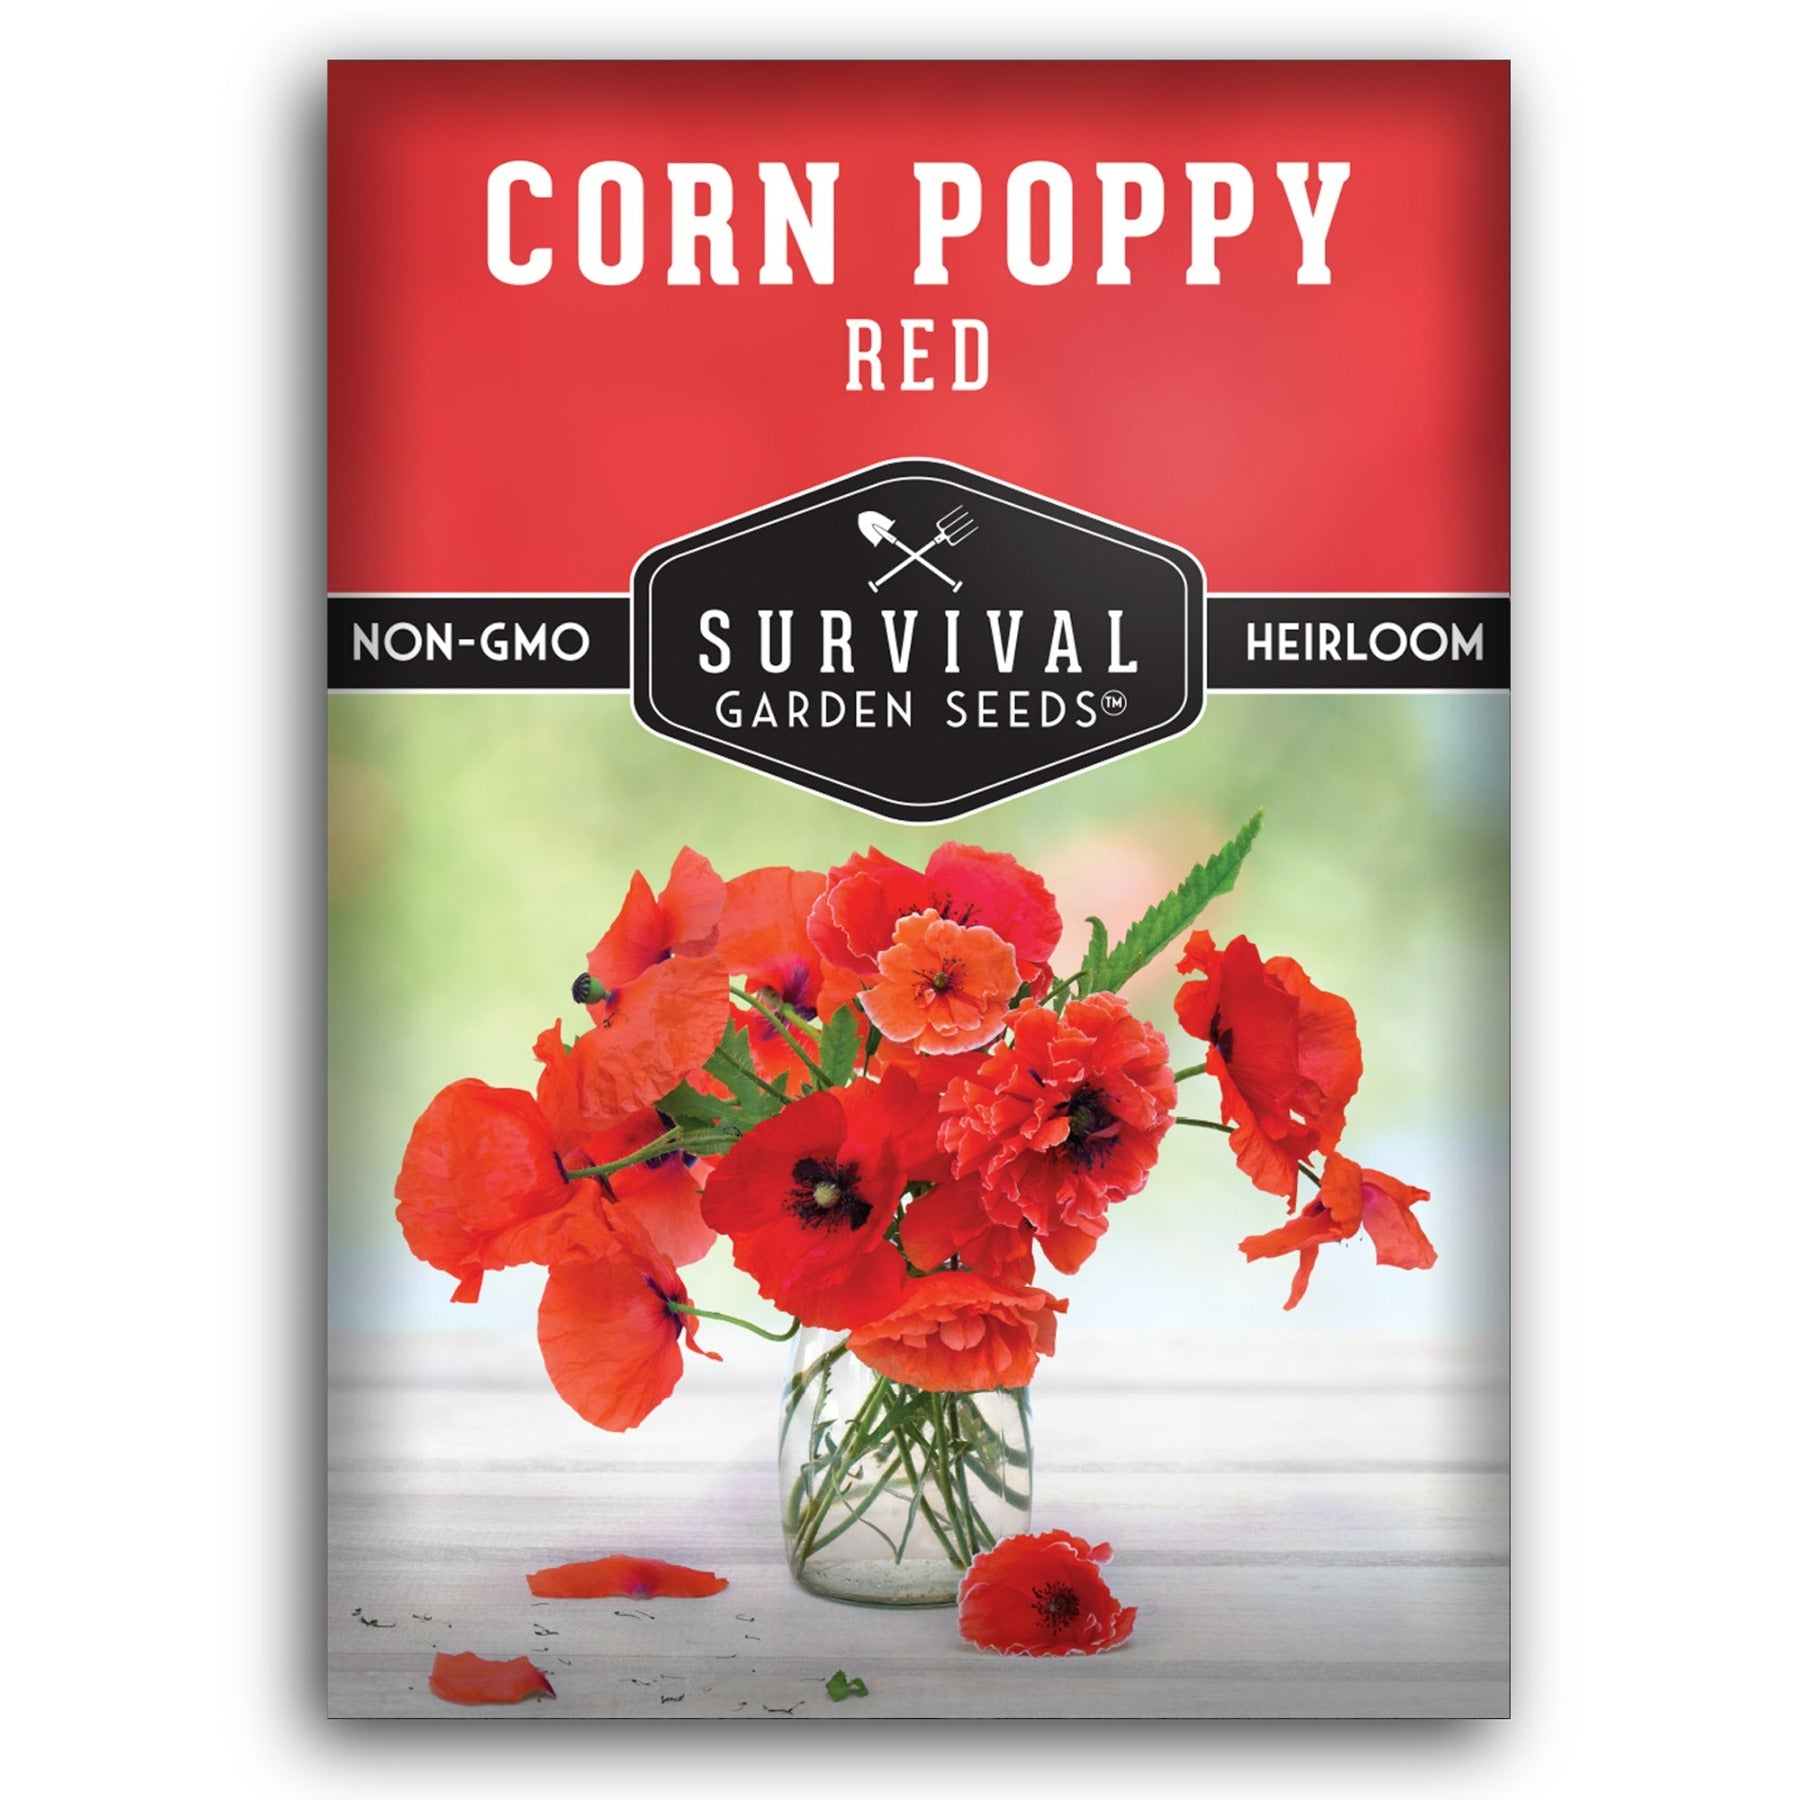 Red Corn Poppy seeds for planting